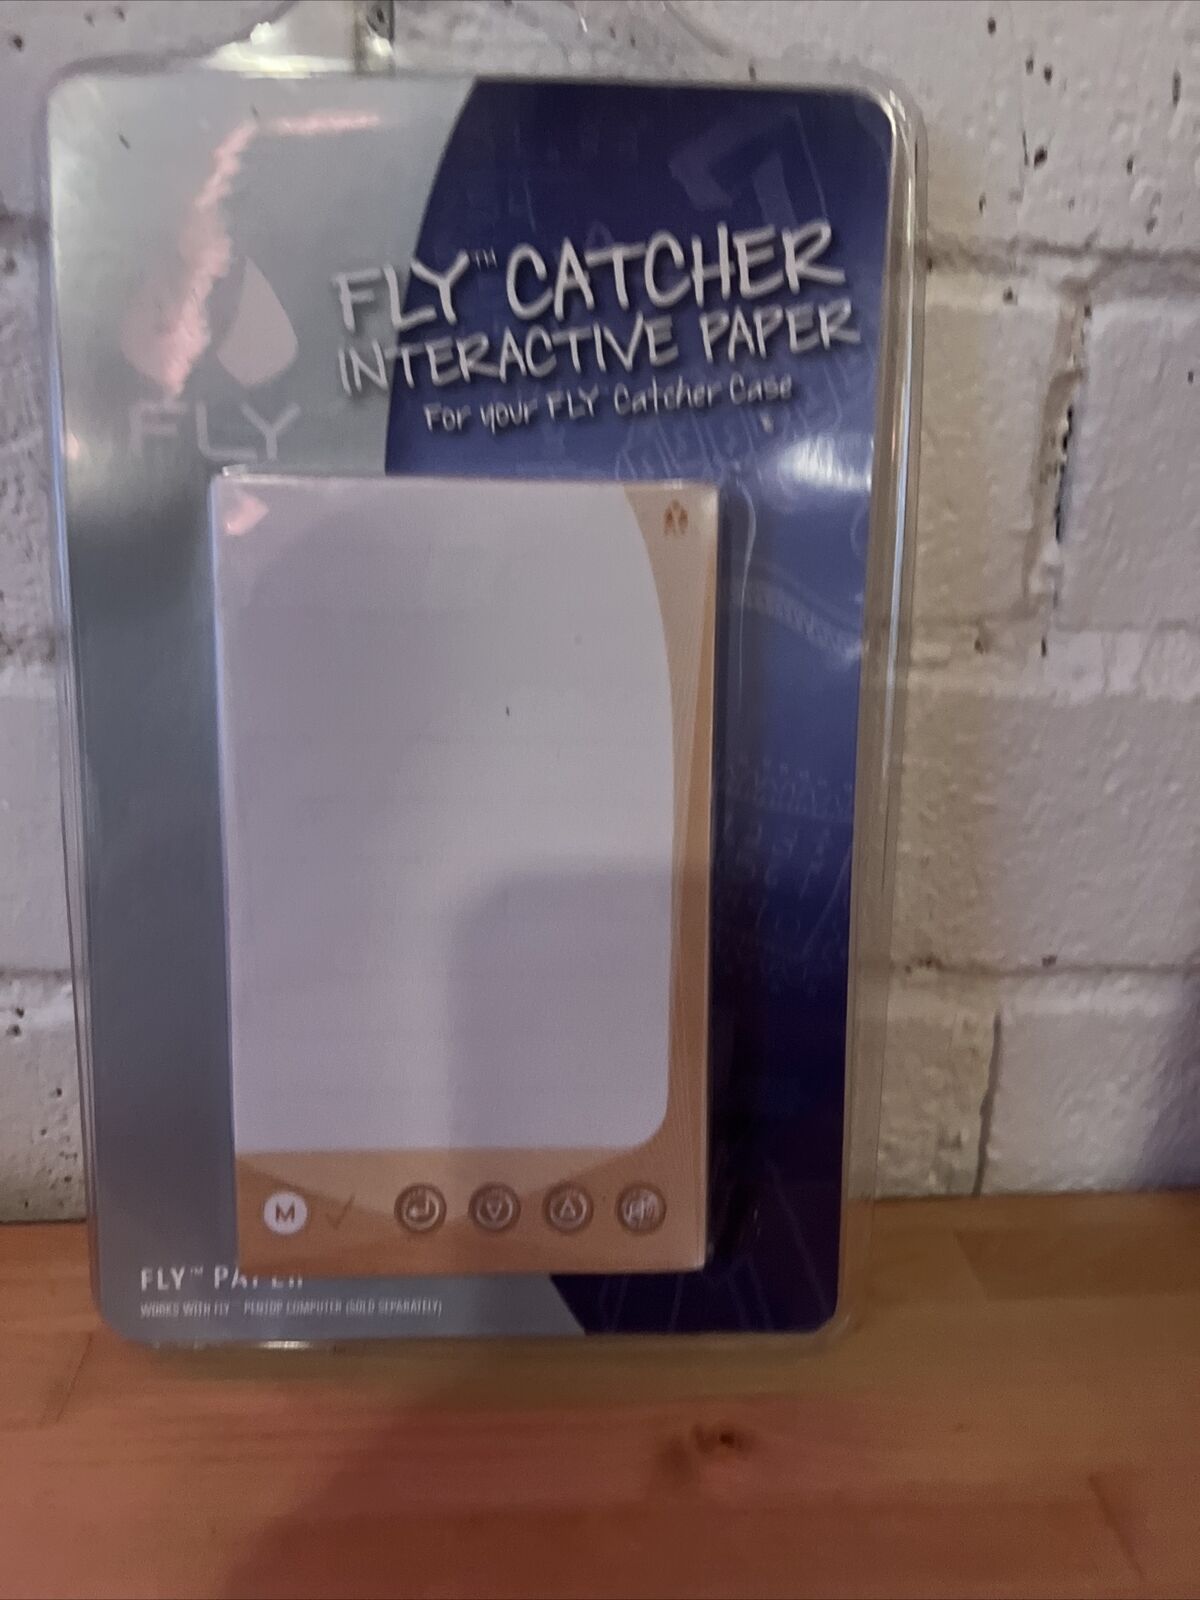 Fly Catcher Interactive Paper For Your Fly Catcher Case NOS